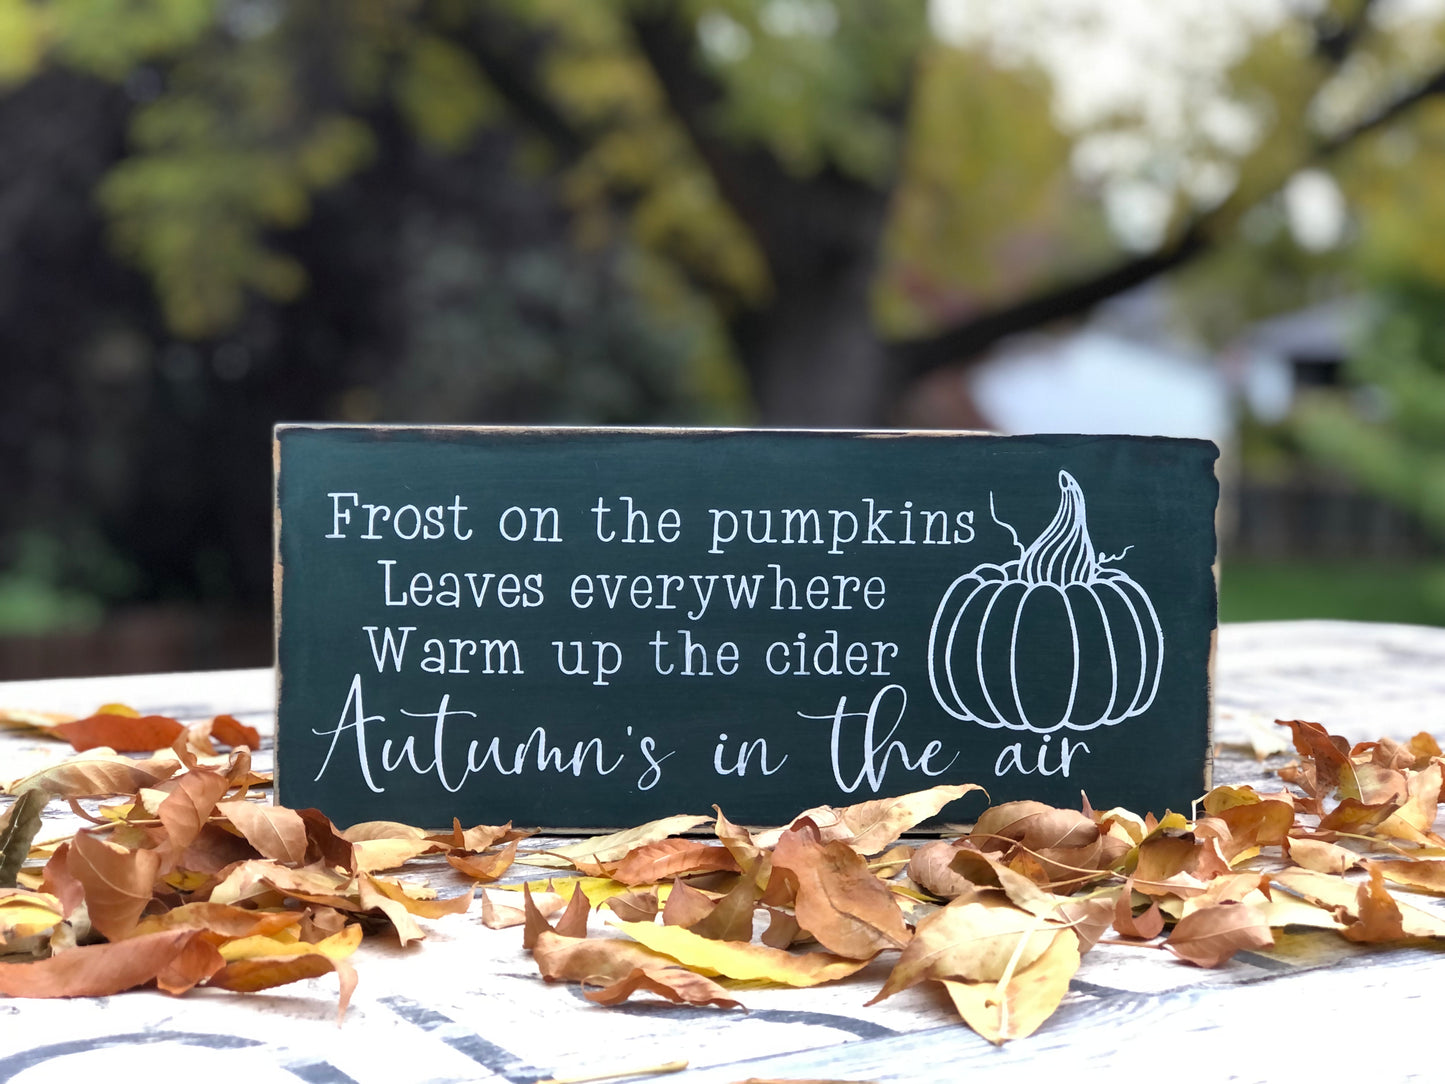 FROST ON THE PUMPKINS LEAVES EVERYWHERE WARM UP THE CIDER AUTUMN’S IN THE AIR WOOD SIGN